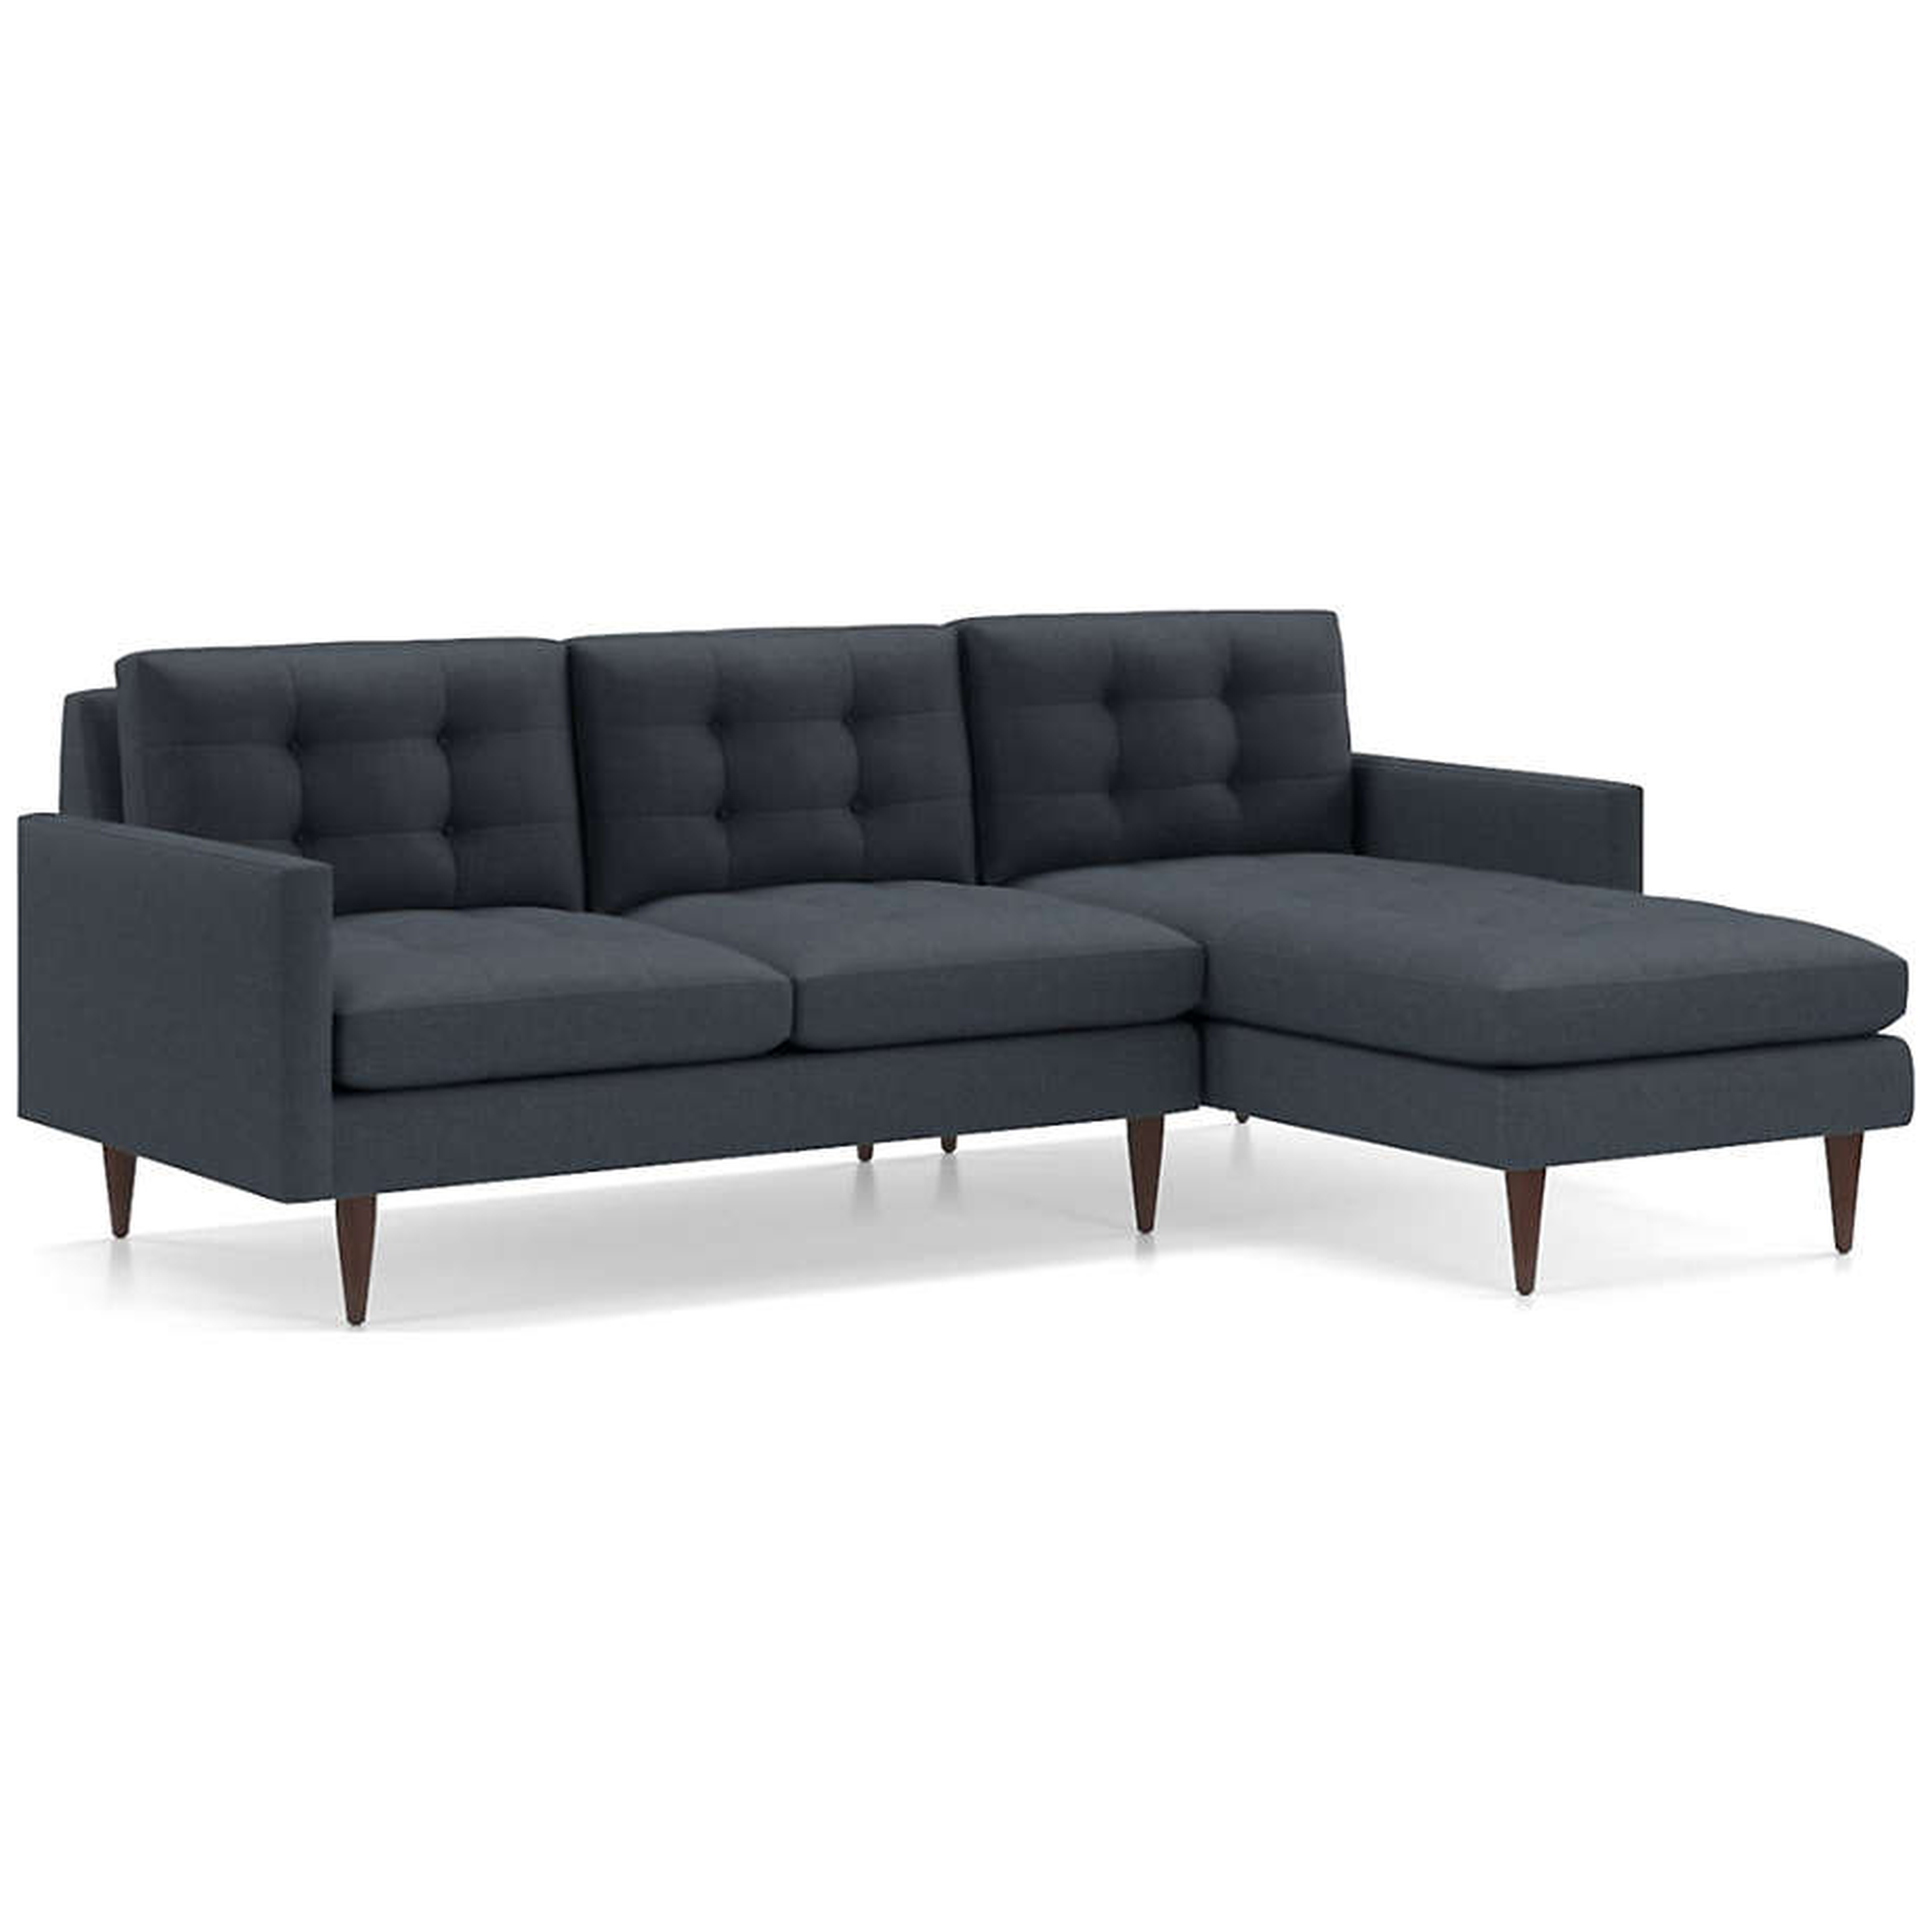 Petrie 2-Piece Right Arm Chaise Sectional Sofa- Jonas, Navy - Crate and Barrel